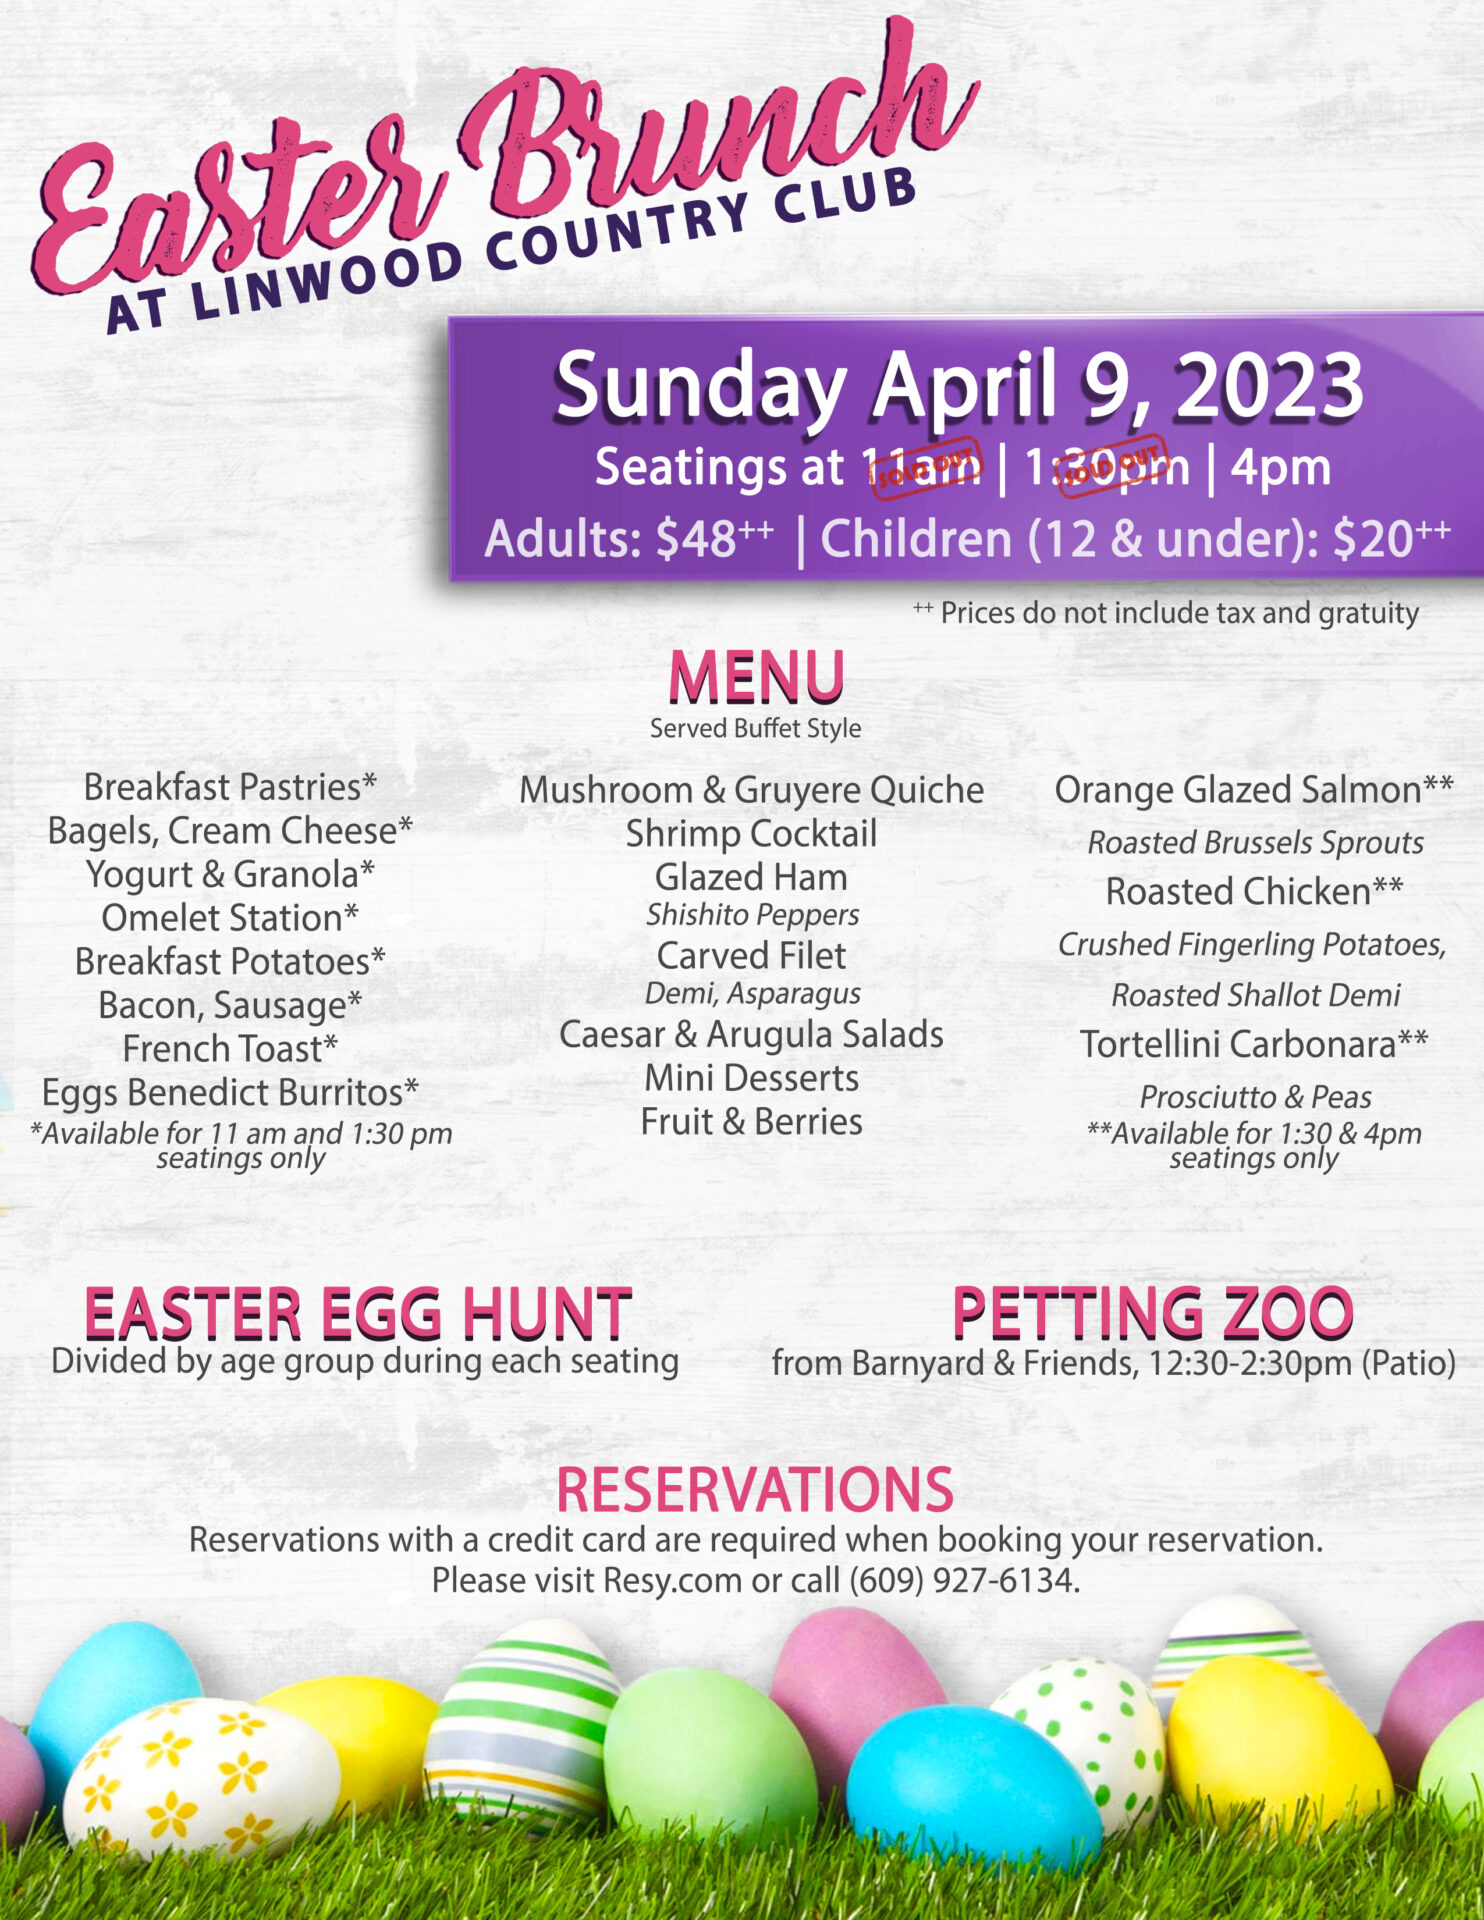 Easter Brunch Linwood Country Club